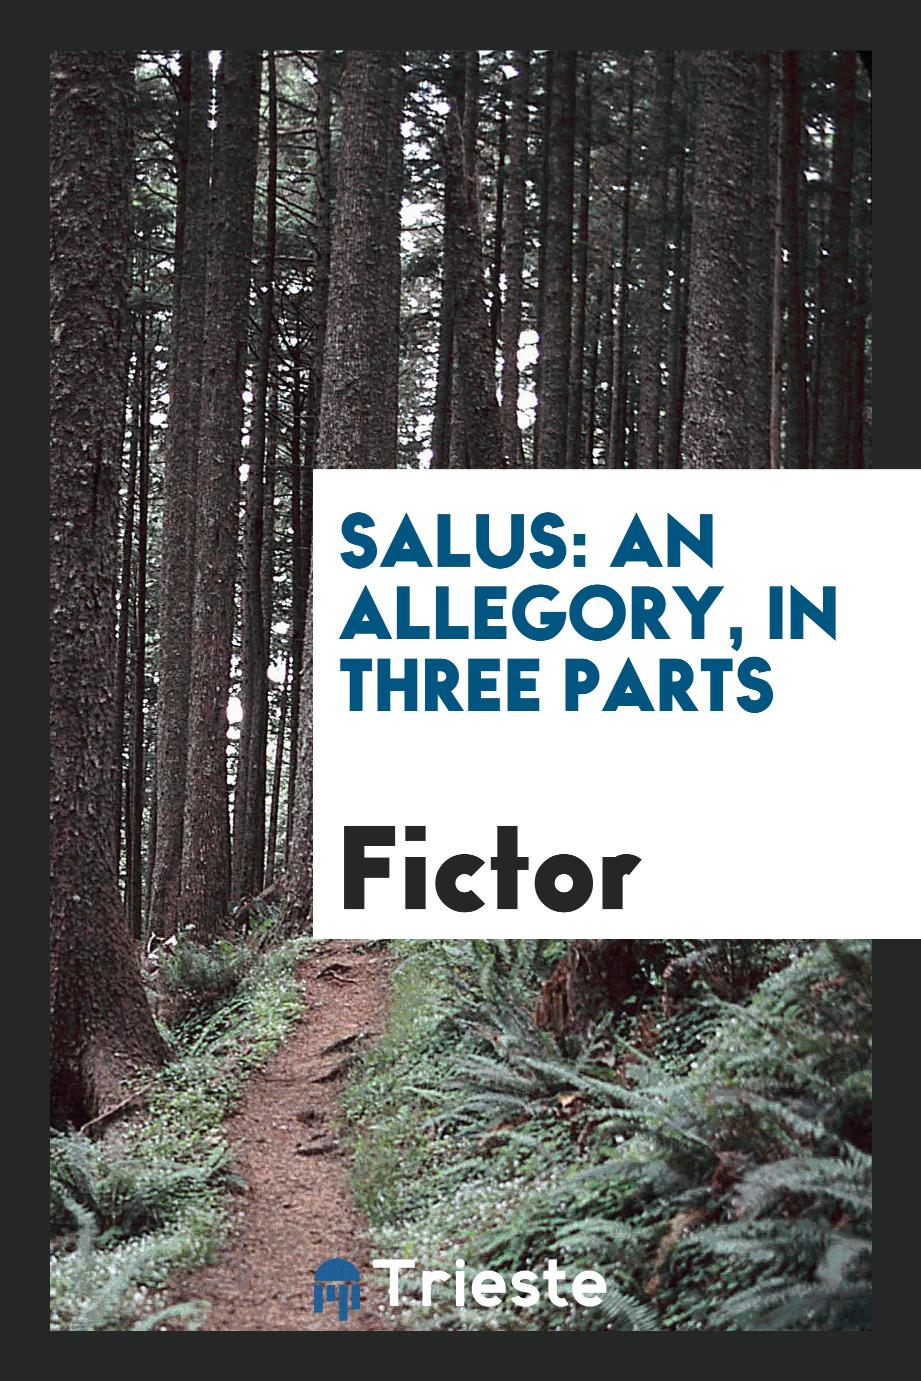 Salus: an allegory, in three parts